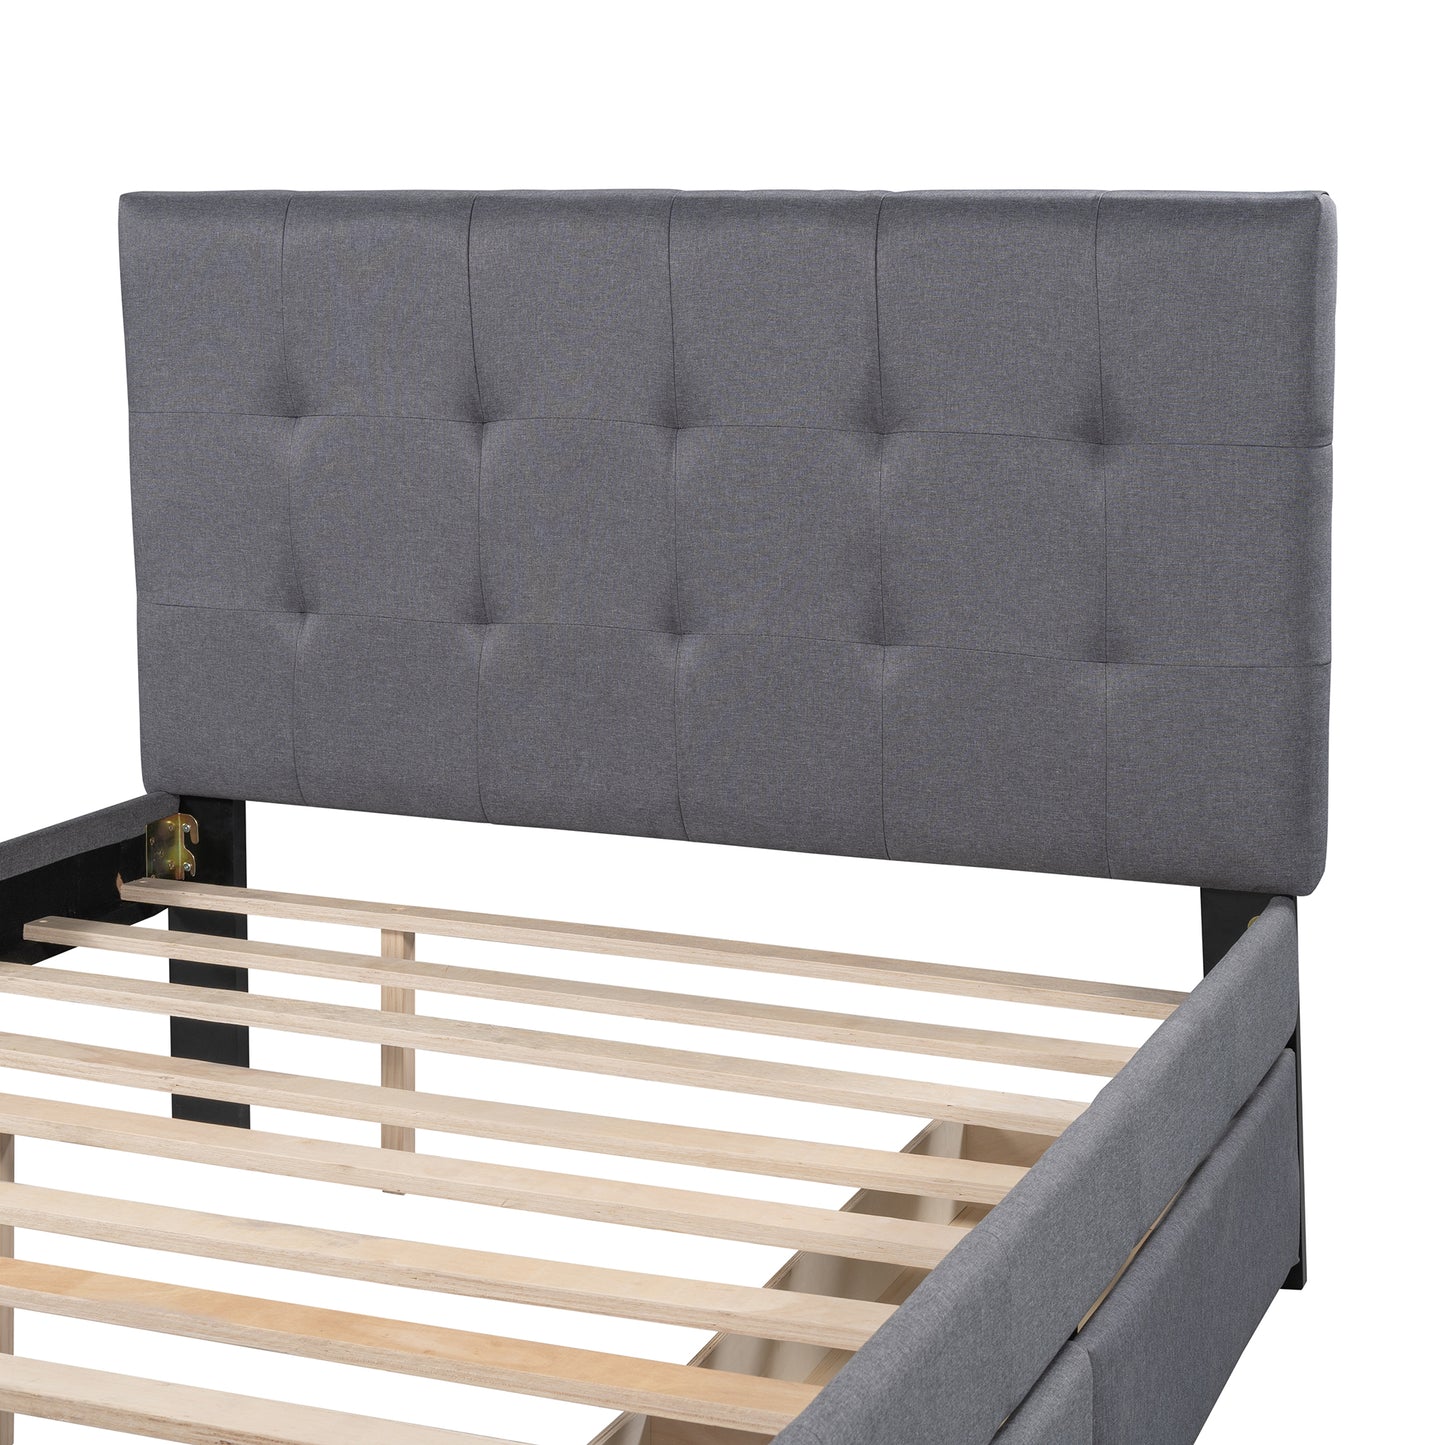 Walmer Upholstered Bed w/ Double Drawers